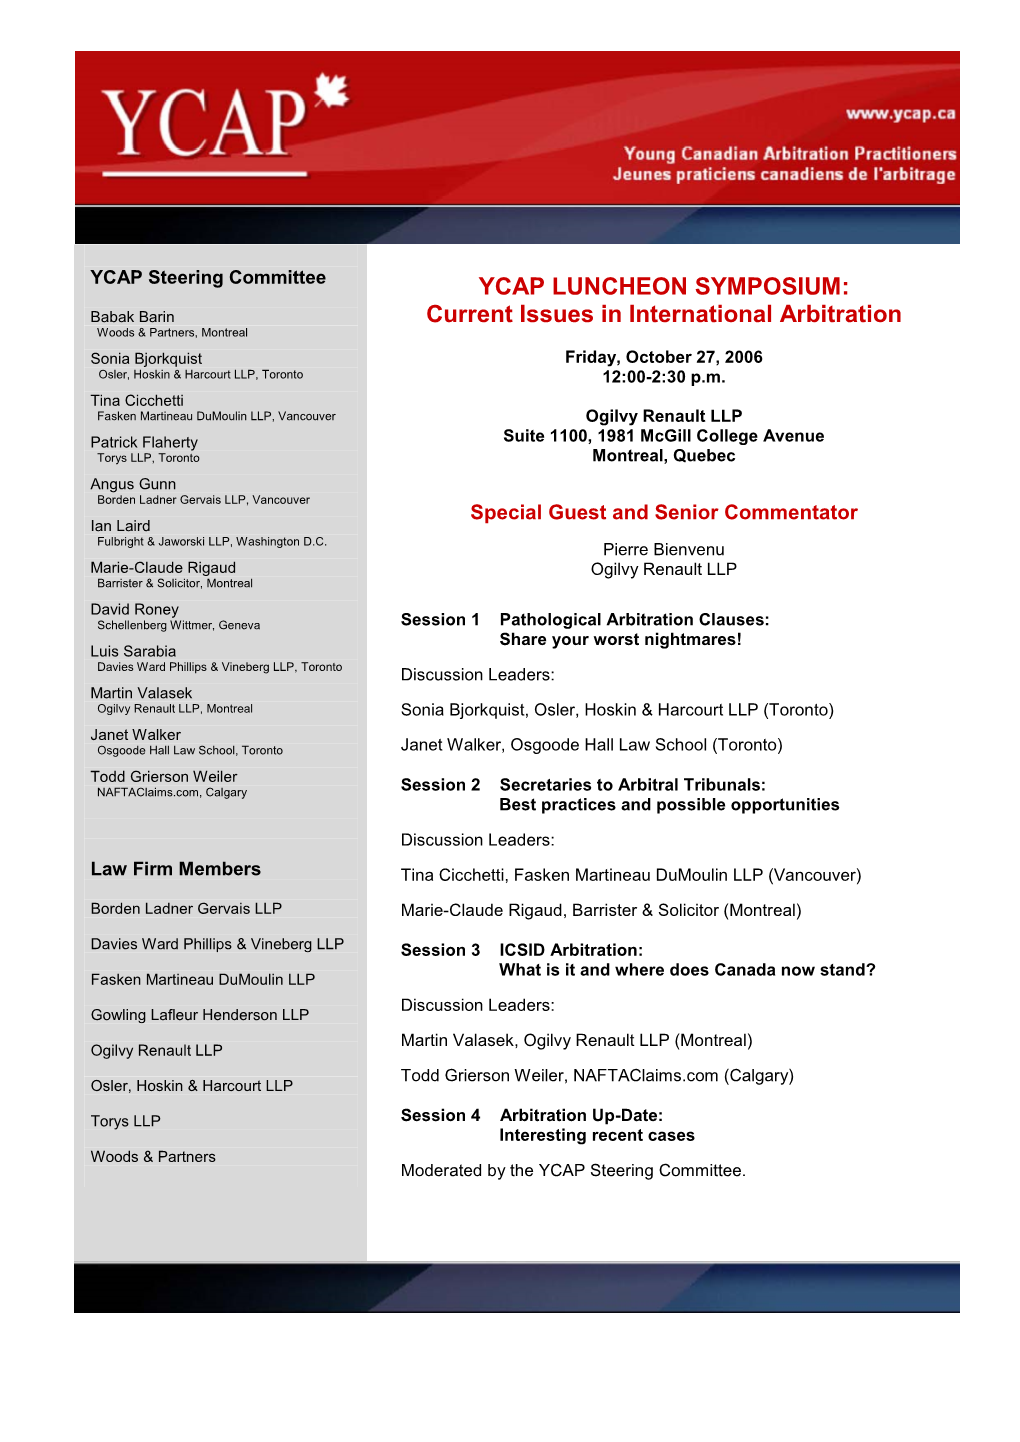 YCAP LUNCHEON SYMPOSIUM: Current Issues in International Arbitration